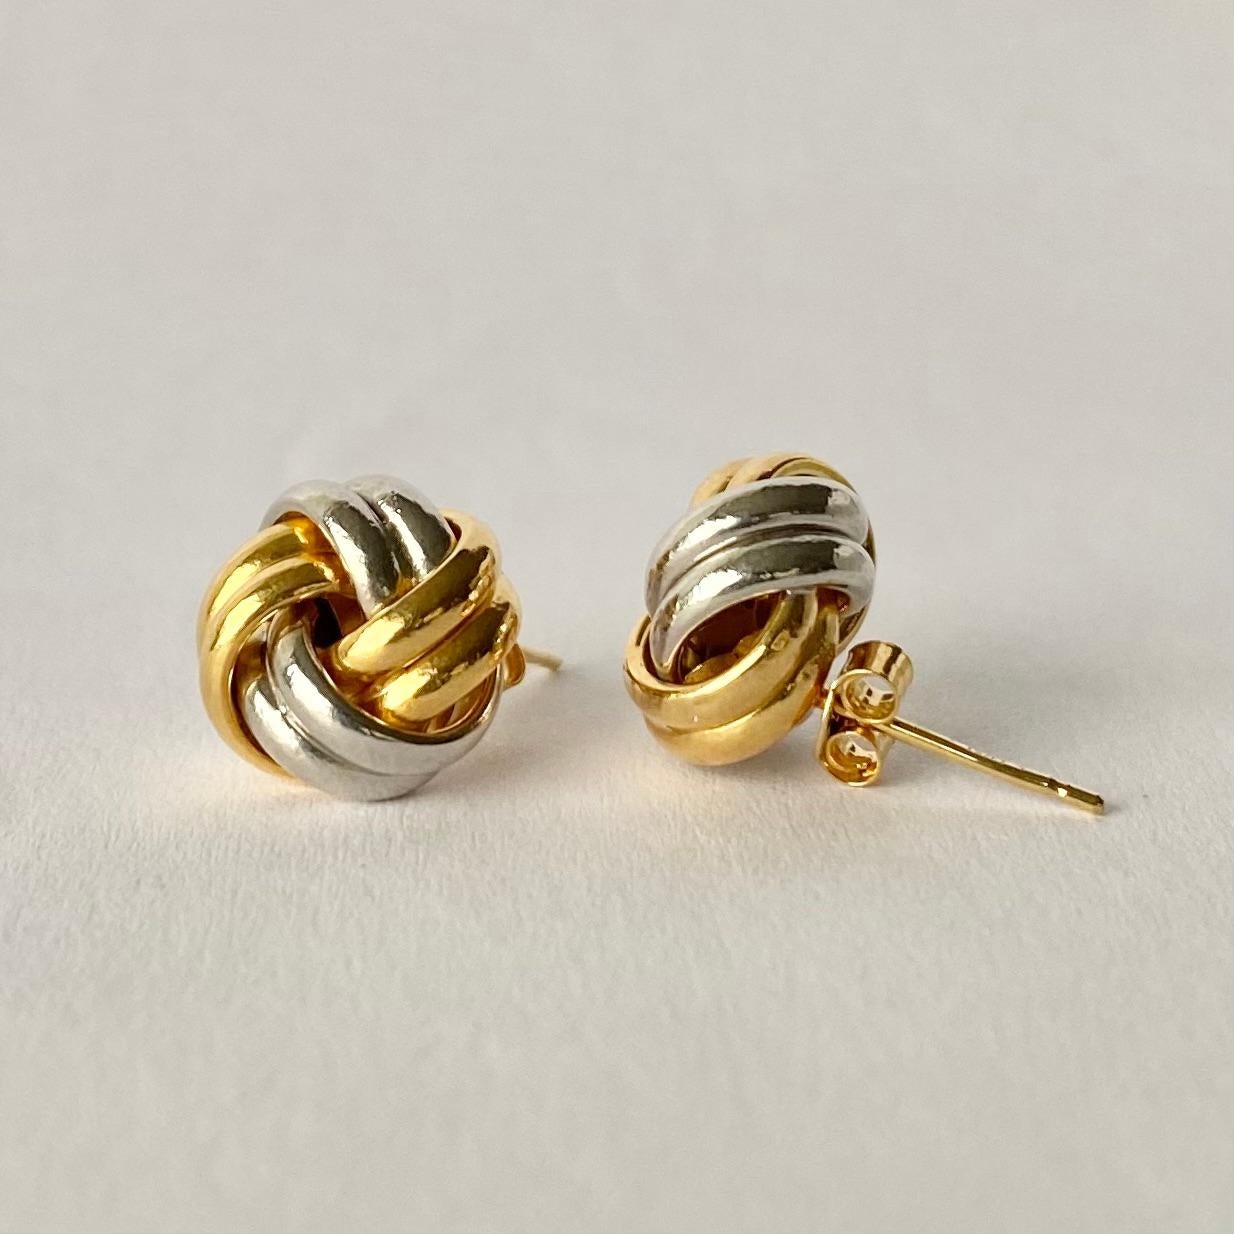 Glossy 9ct yellow and white gold superbly tied in a knot make the most stylish design for these earrings. 

Knot Diameter: 10mm
Height From Ear: 7mm

Weight: 0.93g